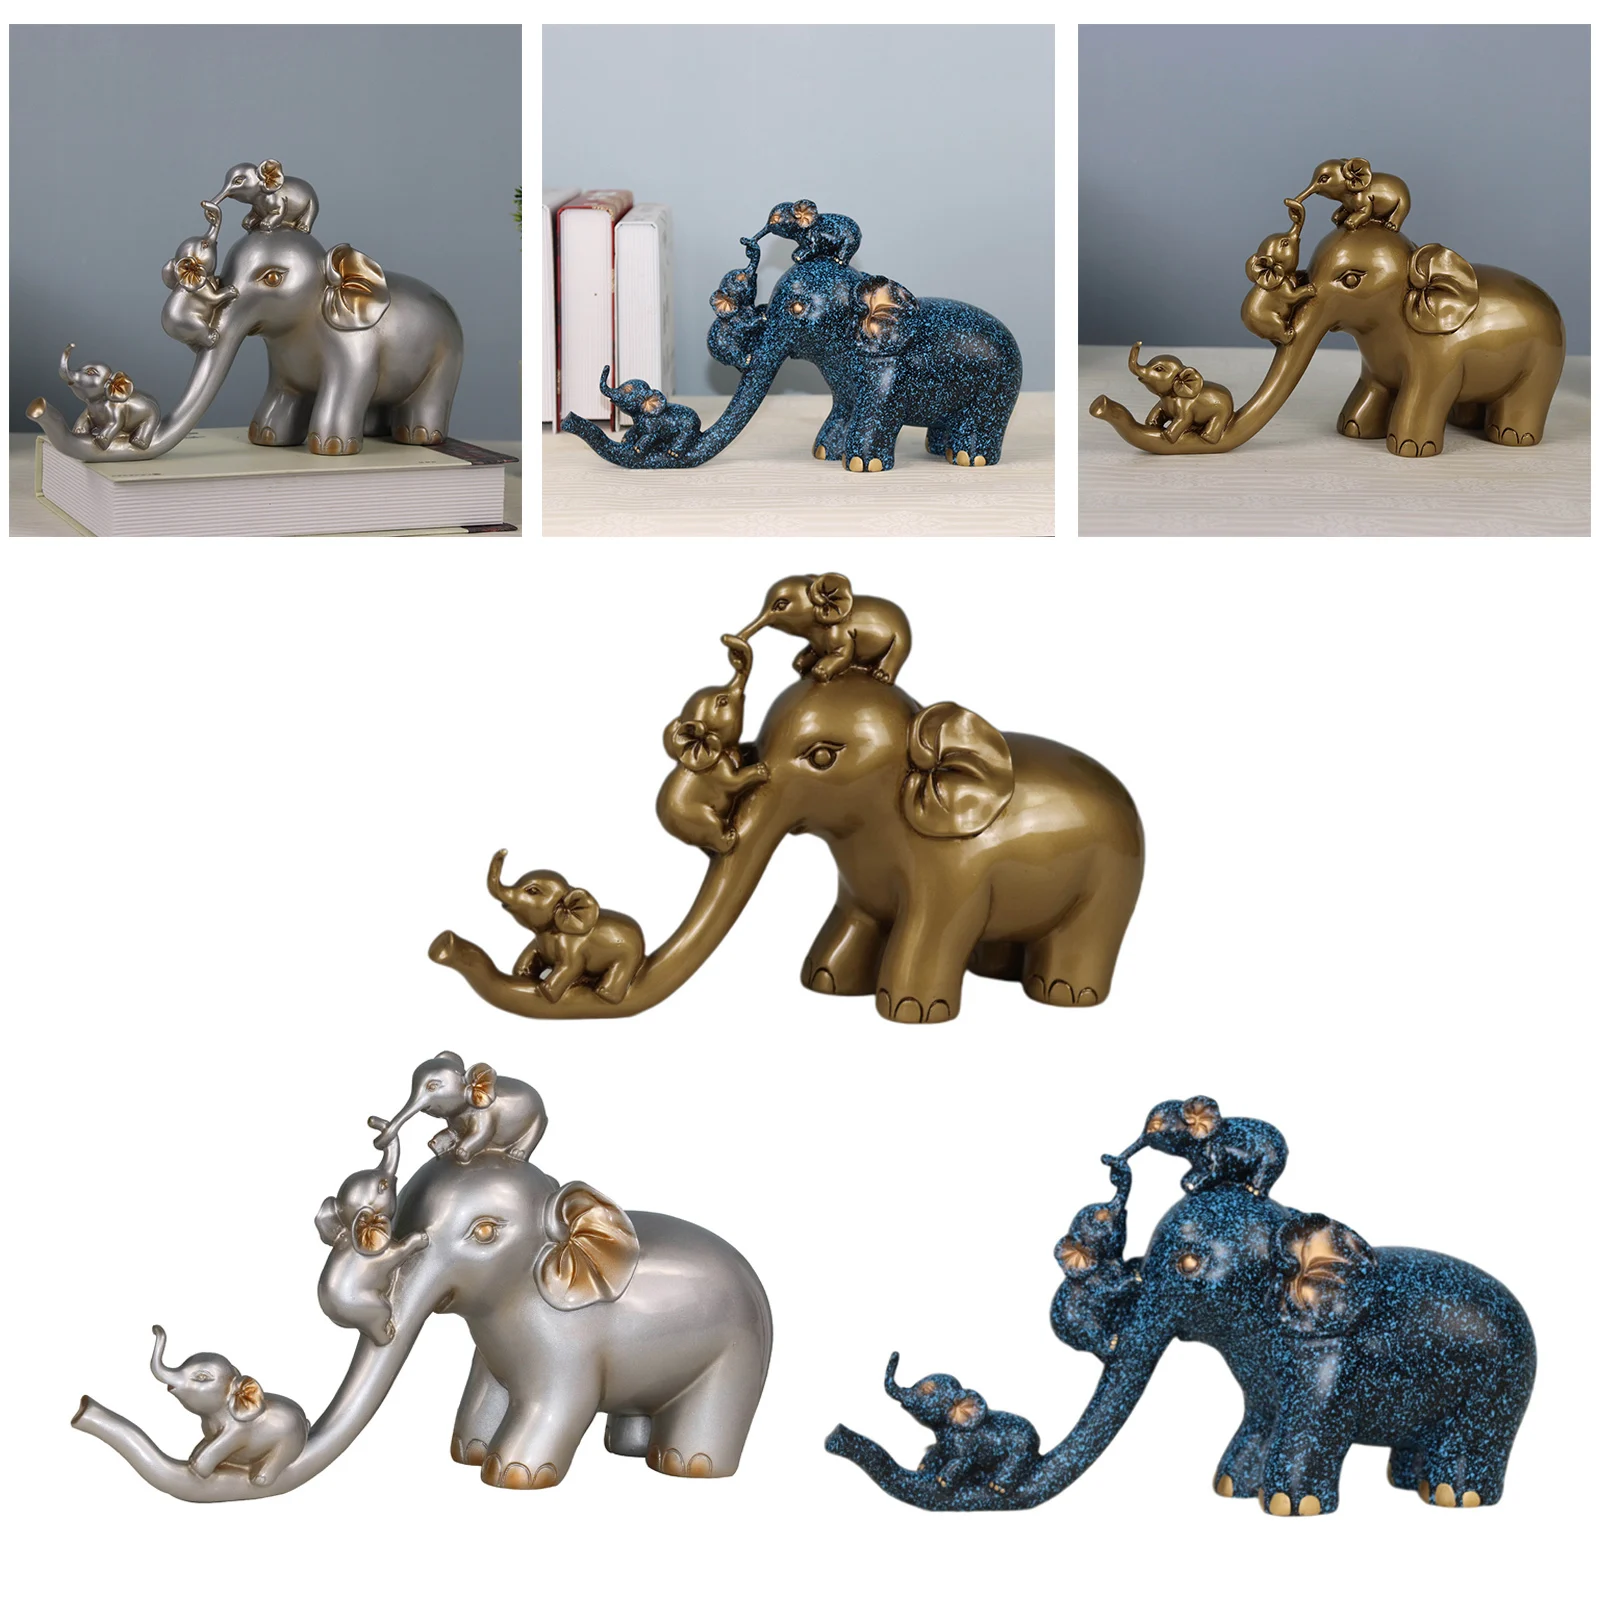 Elephant Mother and Babies Figurine Office Home Tabletop Animal Statue Decor